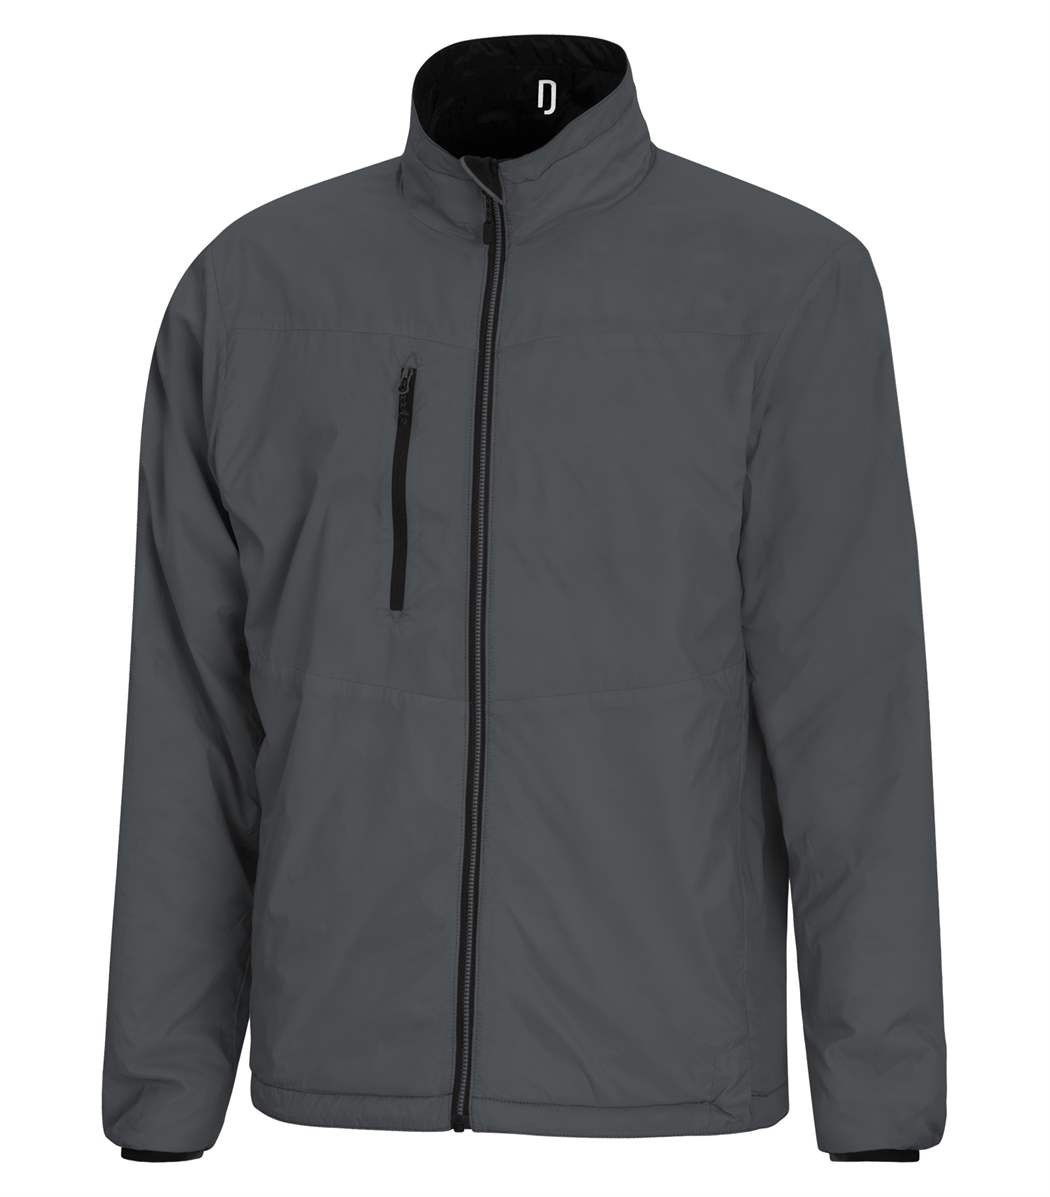 DRYFRAME DF7651 DRY TECH REVERSIBLE LINER JACKET - Great West Graphics